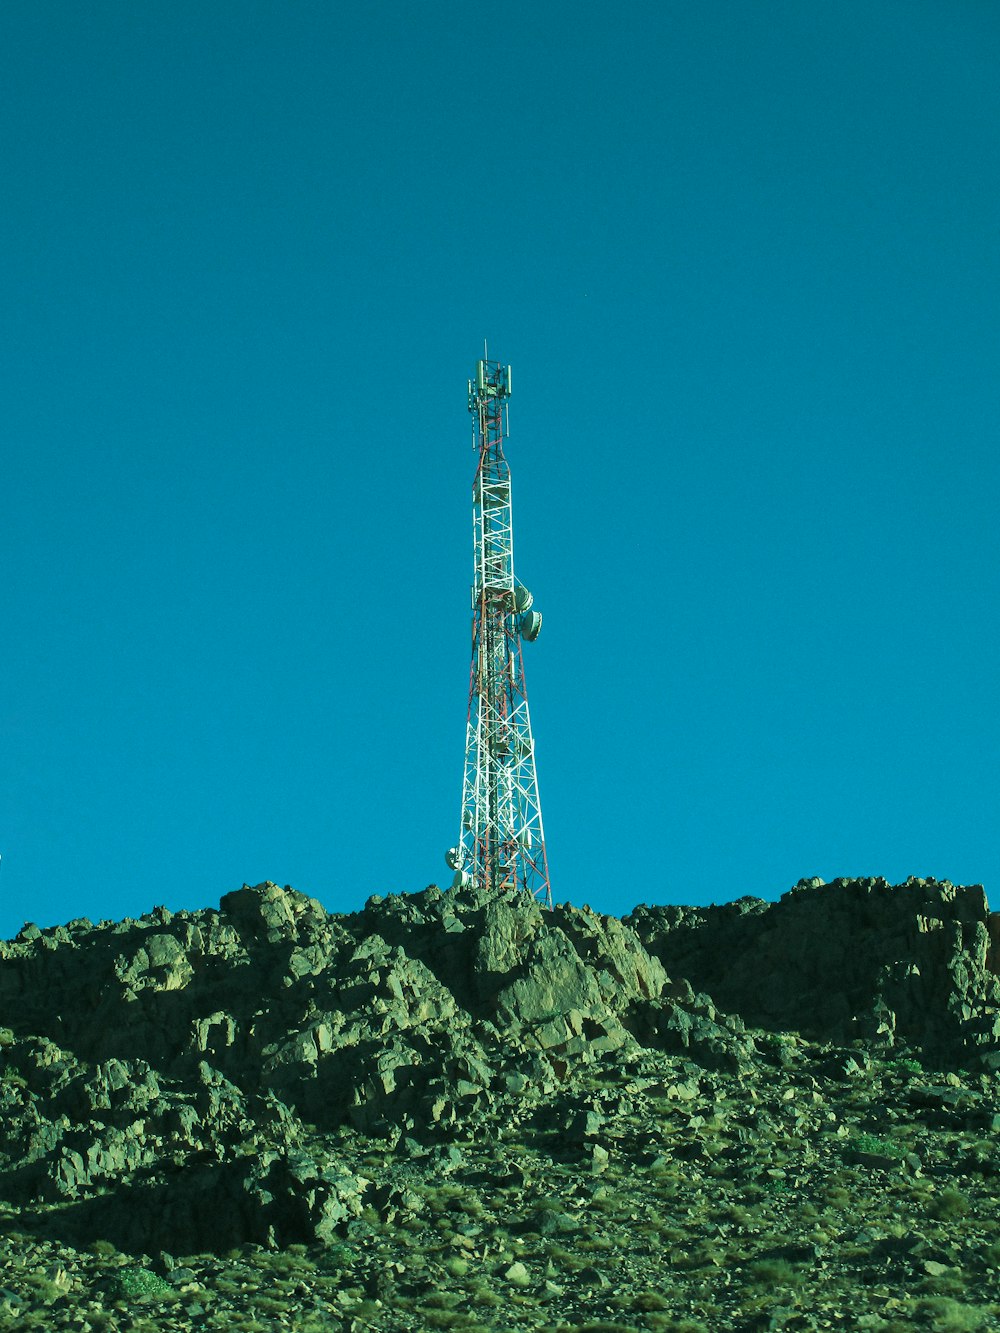 a radio tower on top of a rocky hill